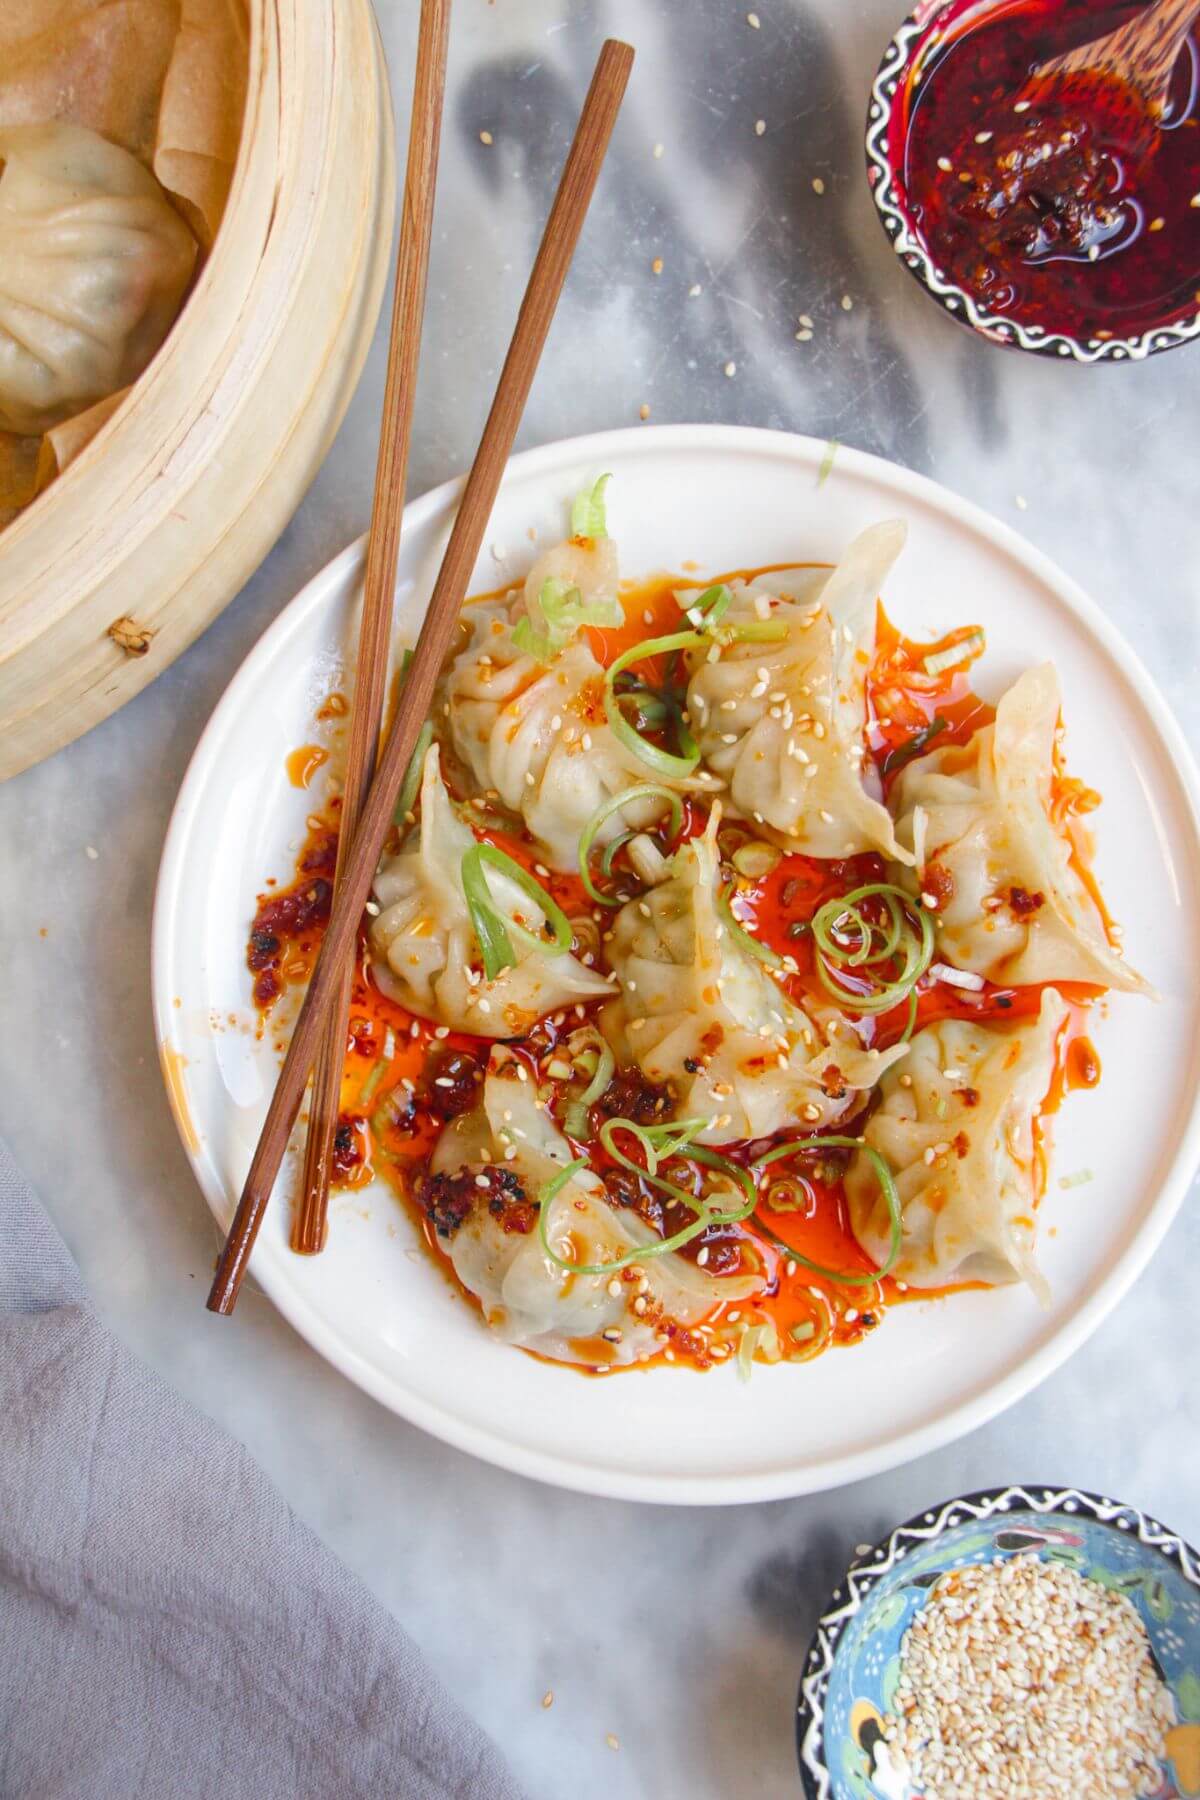 Steamed dumplings on a small white plate, drizzled with chilli oil.